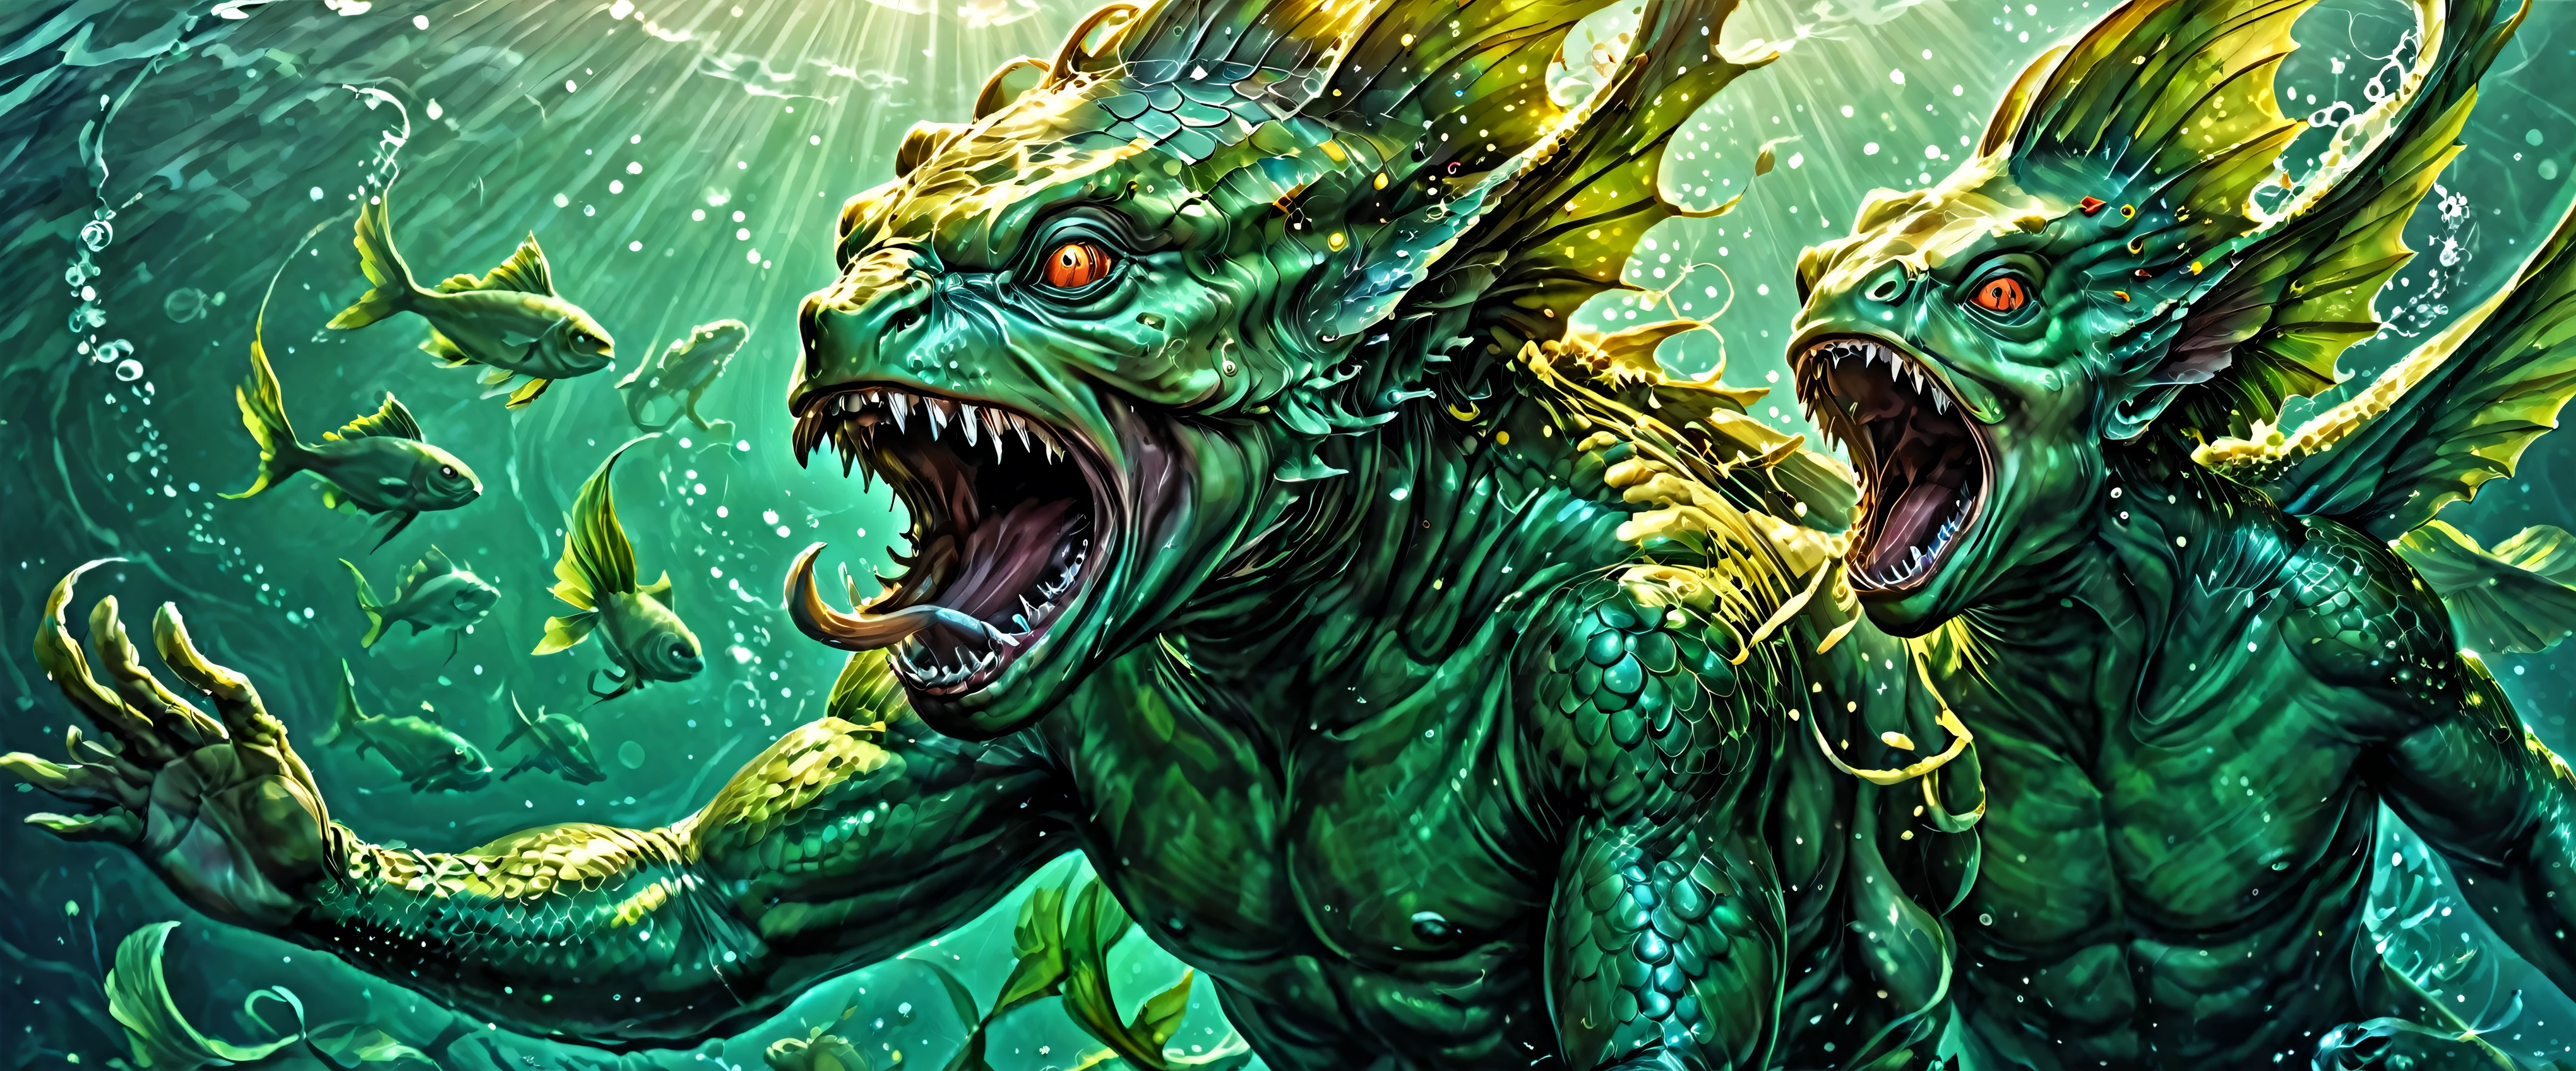 many monsters\(deep ones,greyish-green, white bellies,mostly shiny and slippery,backs were scaly,vaguely suggested the anthropoid, heads of fish, with prodigious bulging eyes sides of their necks were palpitating gills, long paws were webbed\) and the very huge monster\(Dagon,scales,water scraps on hands and feet\) are praying to excessively huge haze in the shape of Cthulhu\(green,octopus-like head whose face was a mass of feelers, a scaly, rubbery-looking body, prodigious claws on hind and fore feet, and long, narrow wings behind\) which is (maddening just to look at:1.3), in the background (psychedelic landscape),(dark underwater temple),(dynamic angle:1.4),art for THE CALL OF CTHULHU